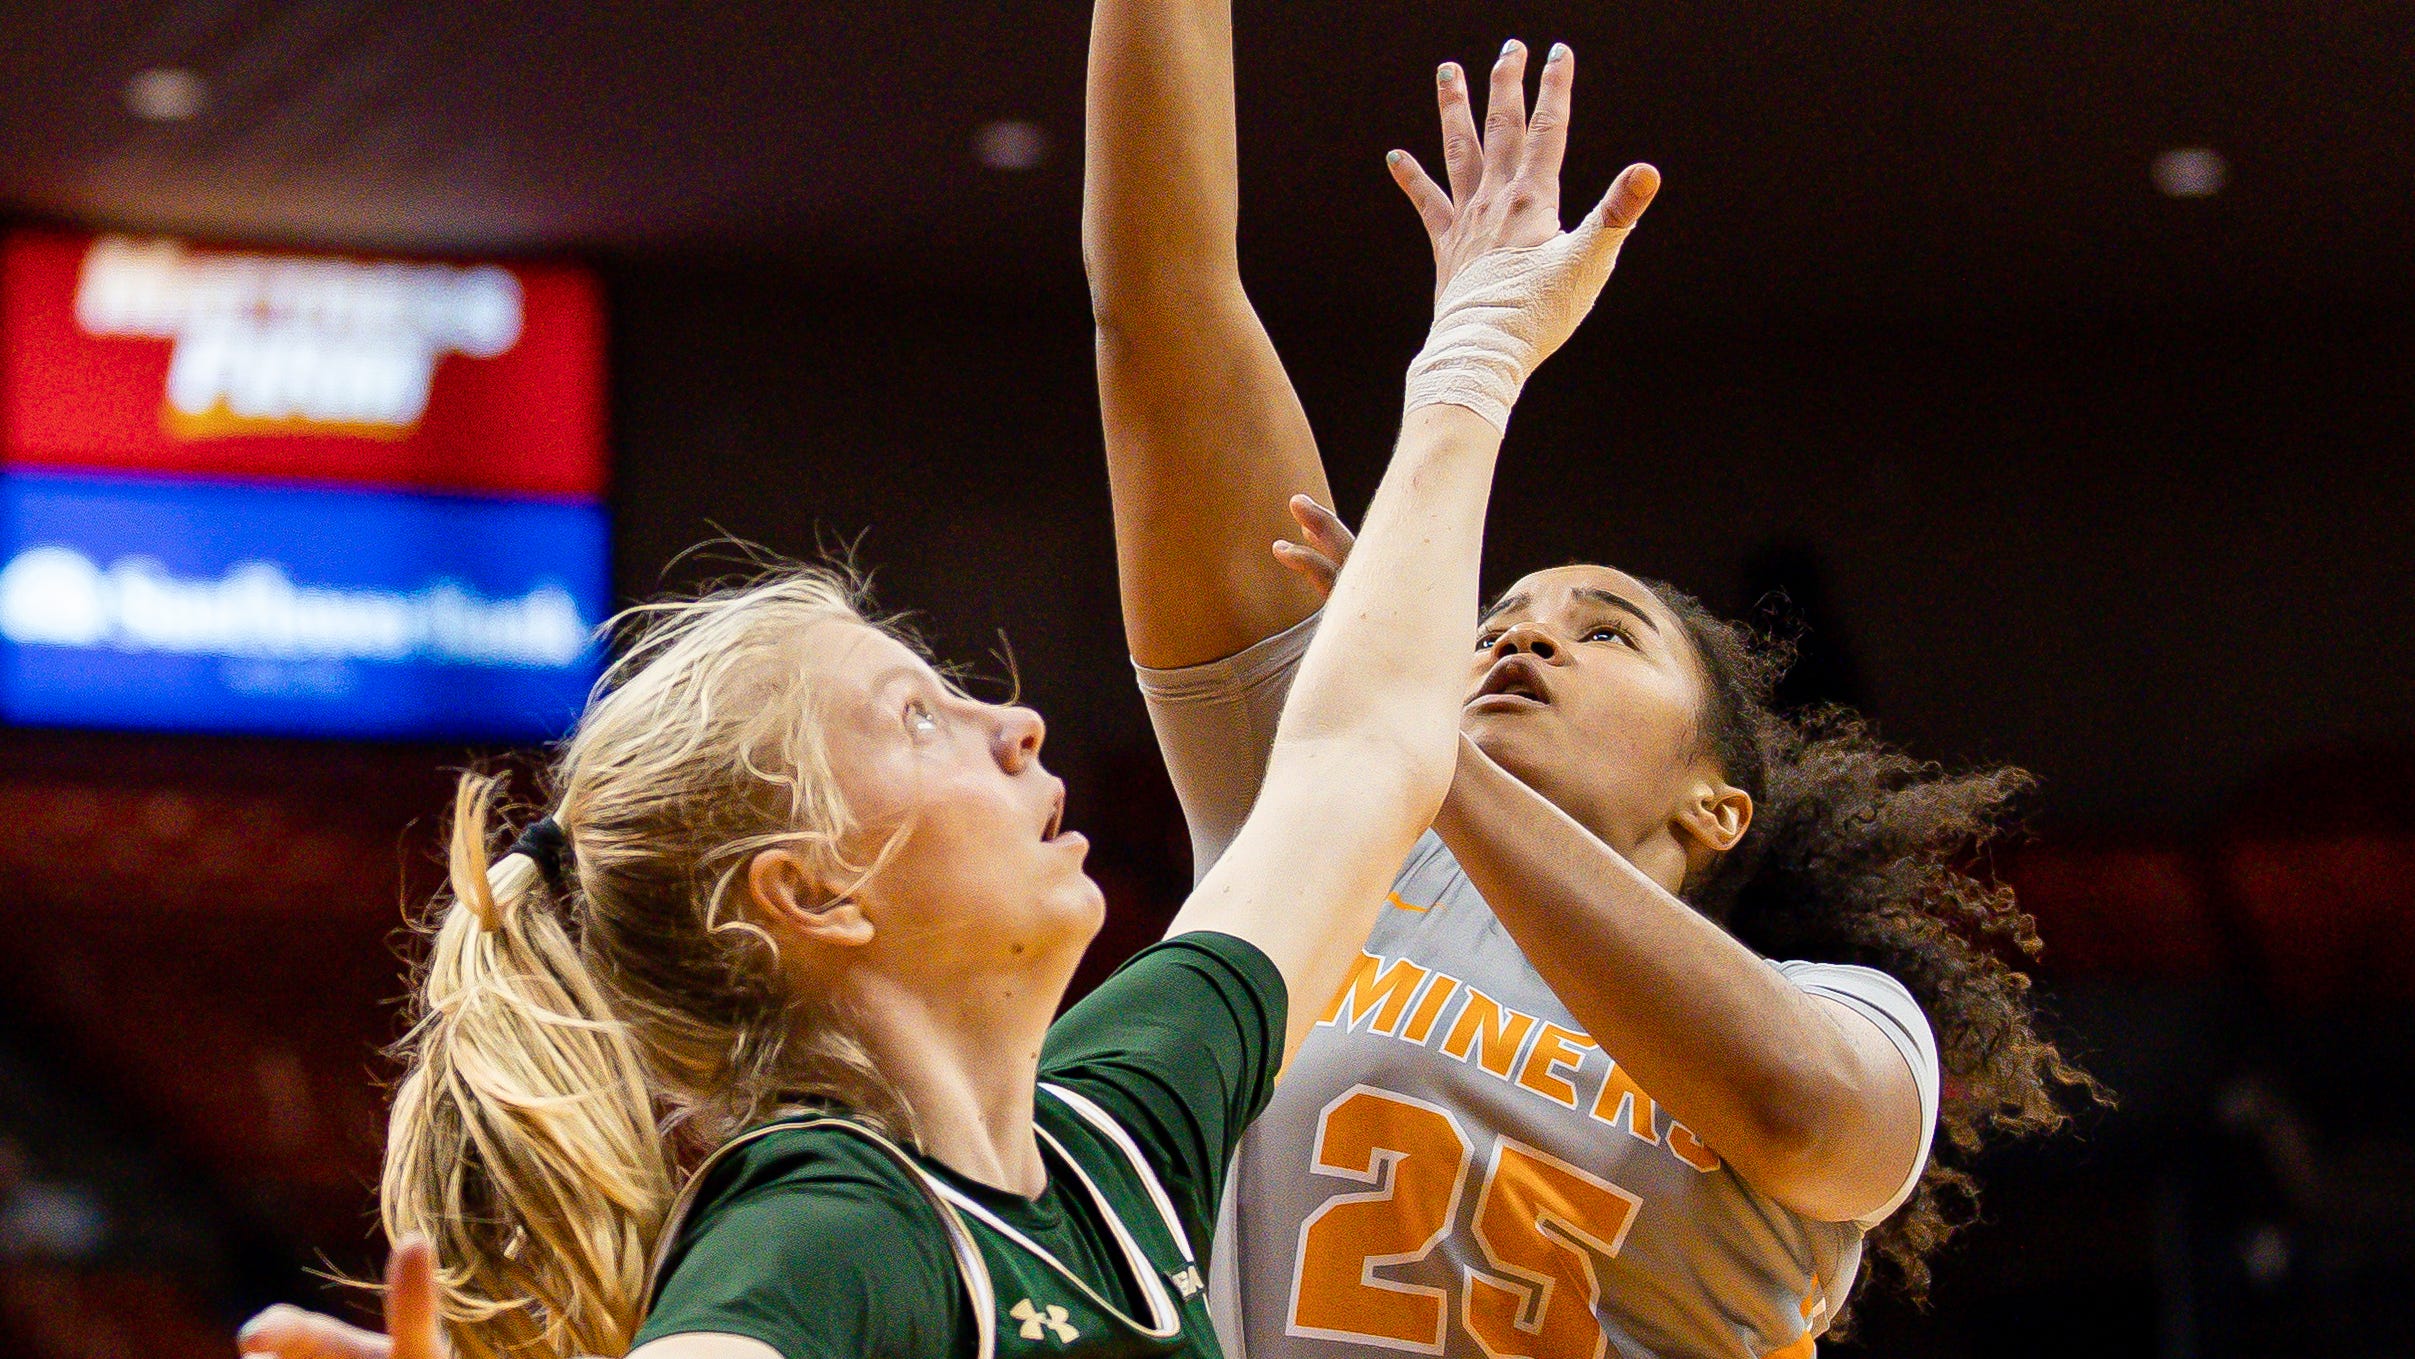 What to know as UTEP Miners women face Rice Owls in basketball game in Houston